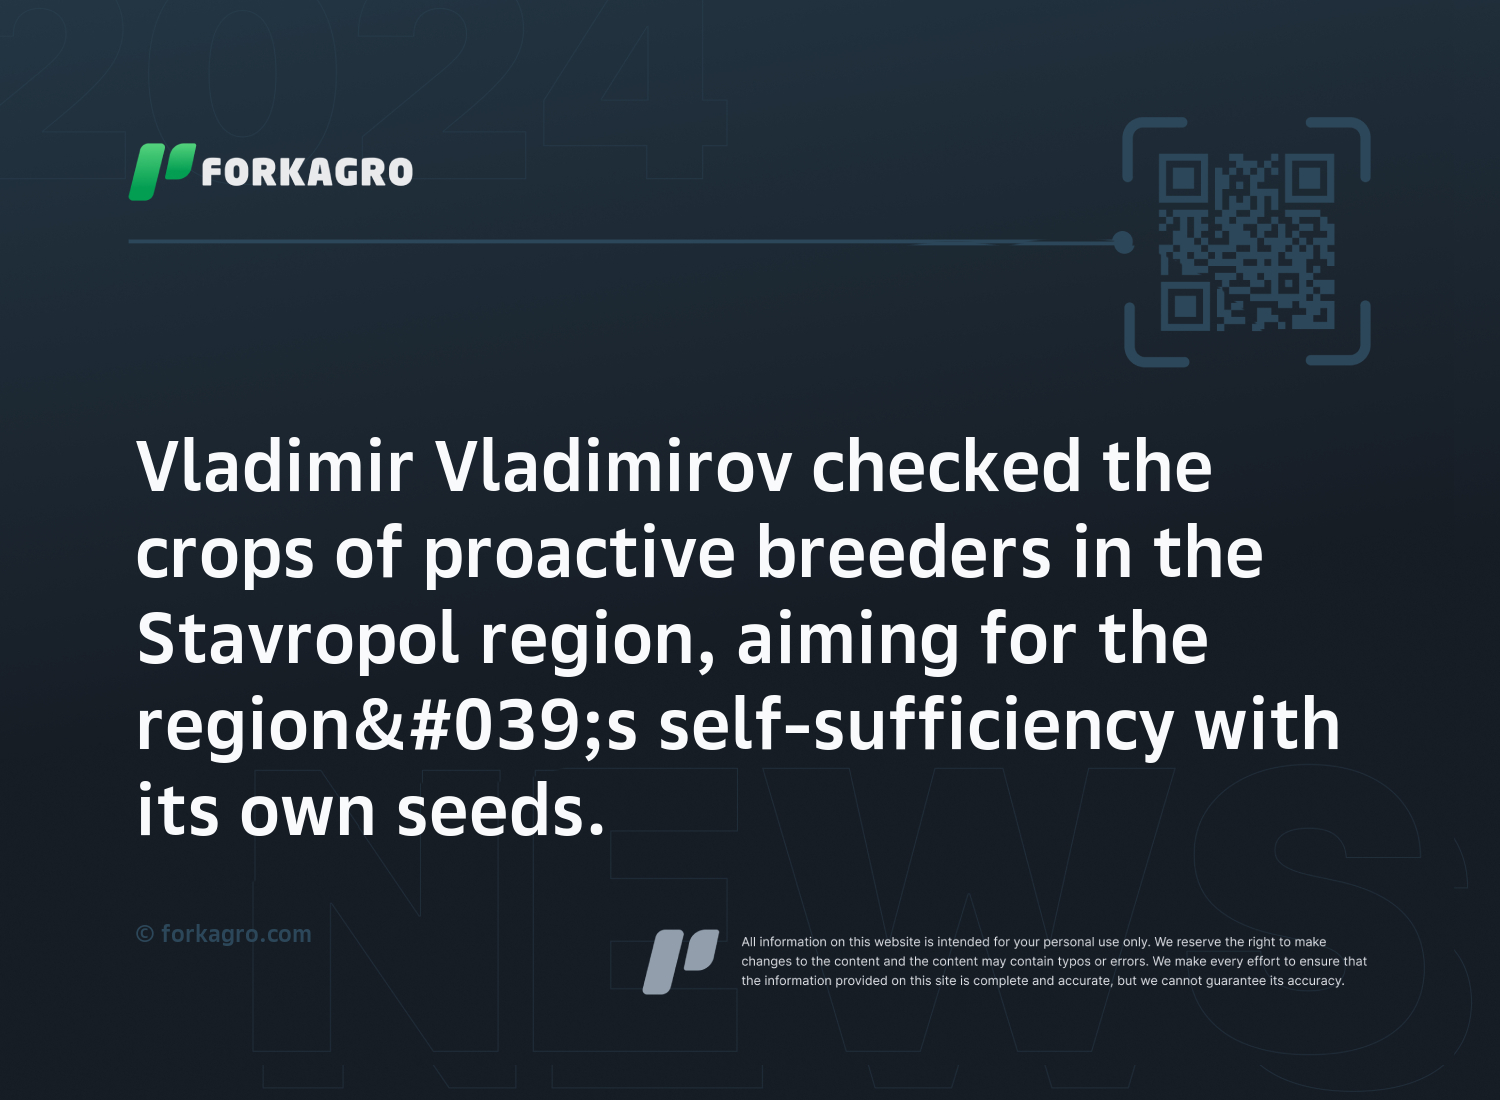 Vladimir Vladimirov checked the crops of proactive breeders in the Stavropol region, aiming for the region's self-sufficiency with its own seeds.